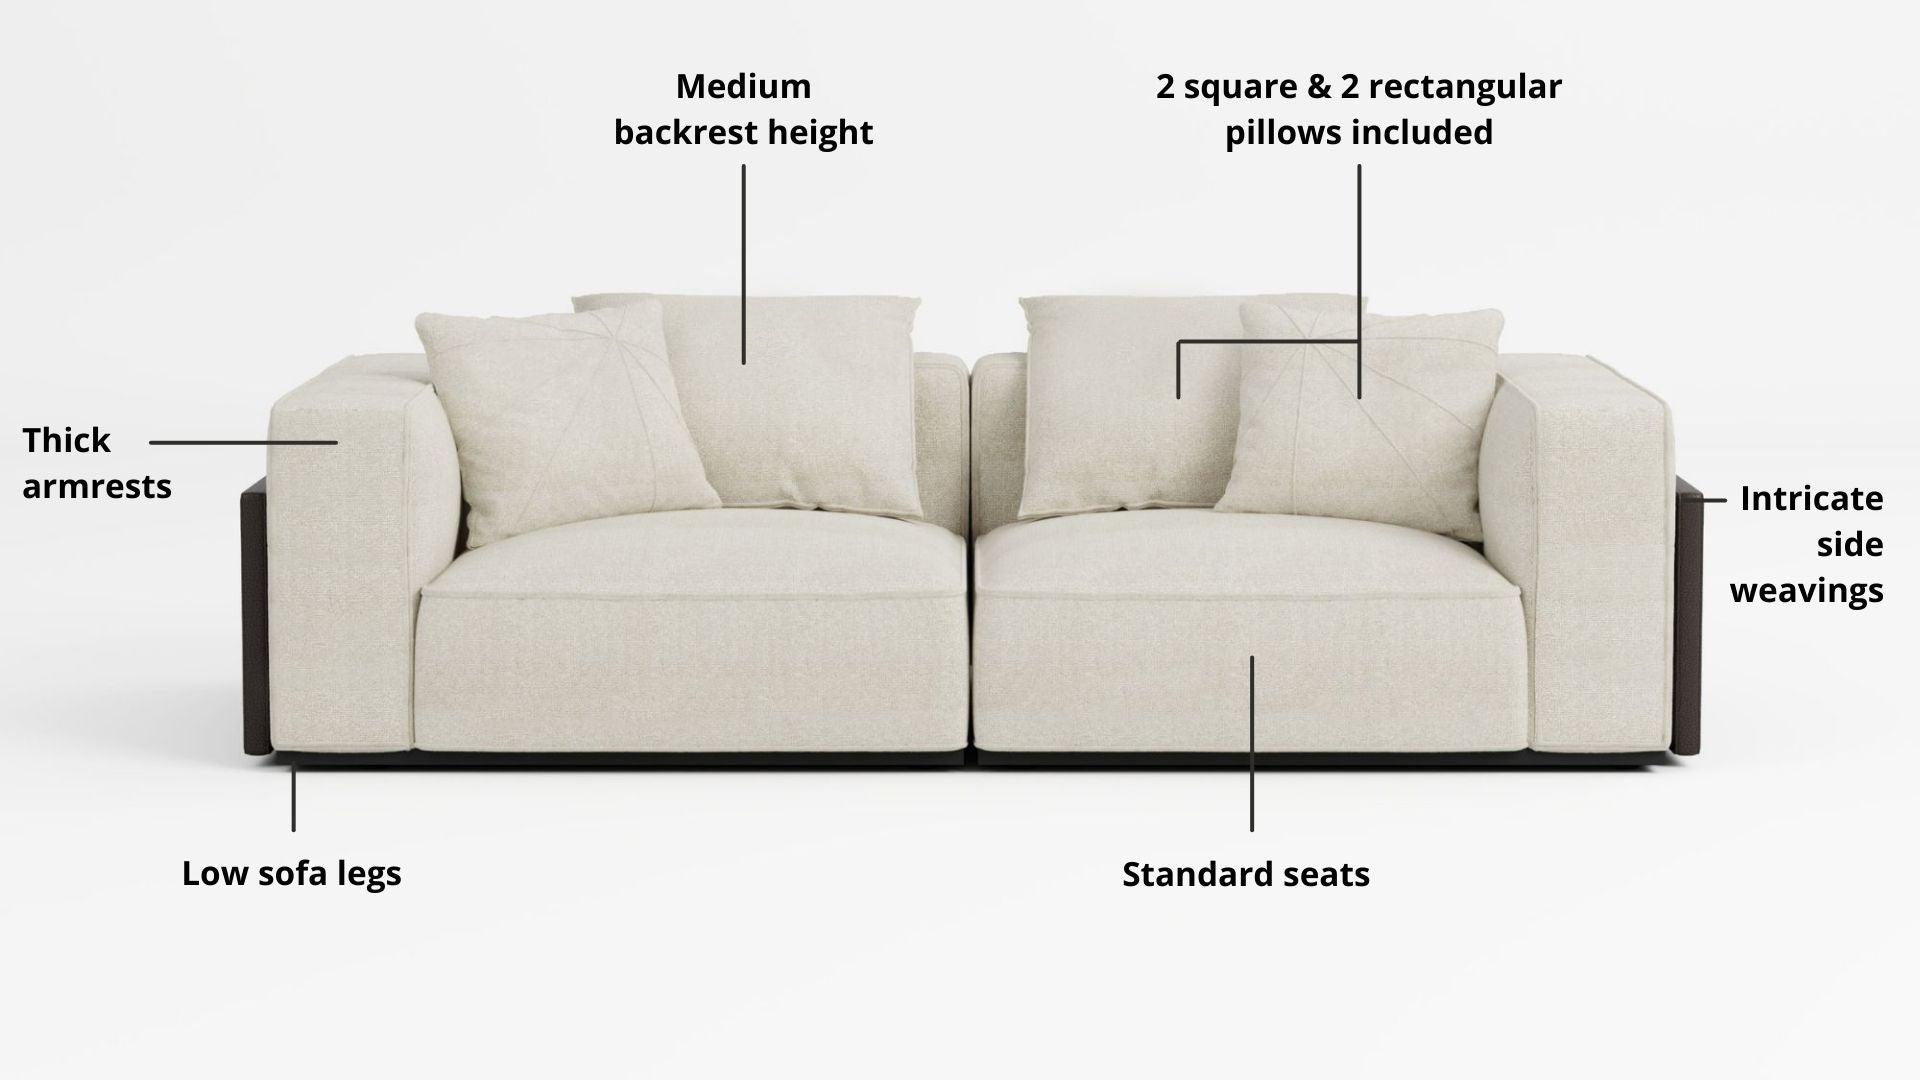 Key features such as armrest thickness, cushion height, seat depth and sofa leg height for Carson Fabric Sofa